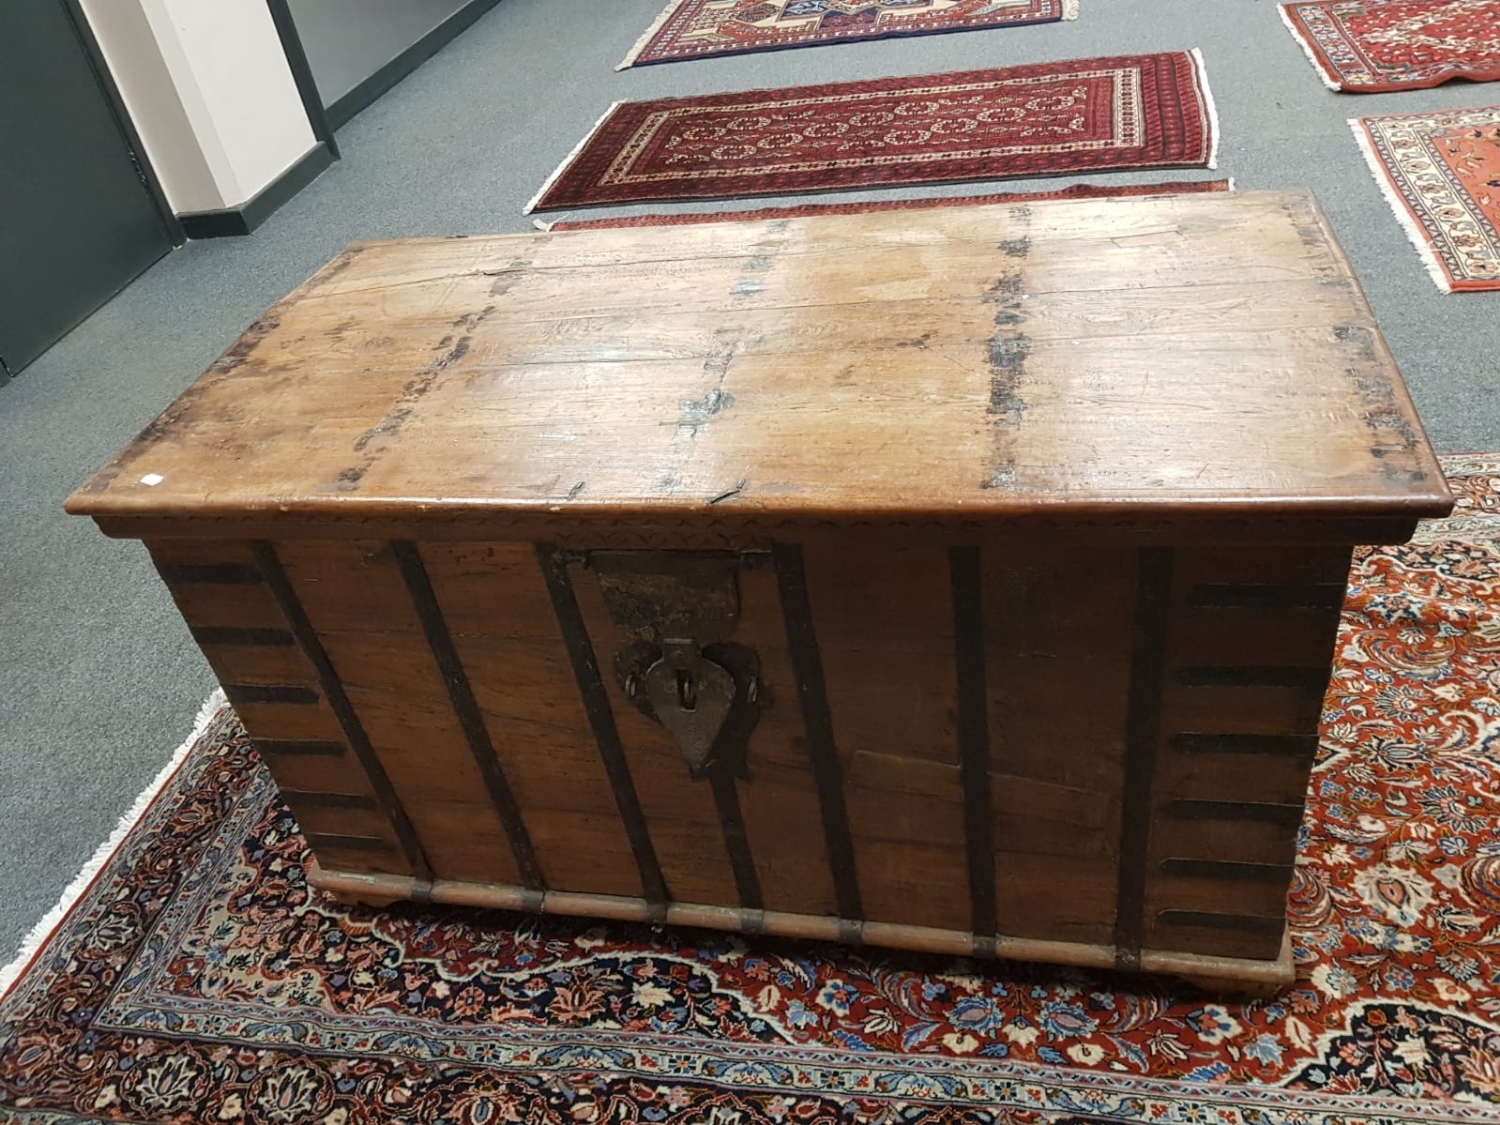 A heavy quality iron bound shipping trunk,